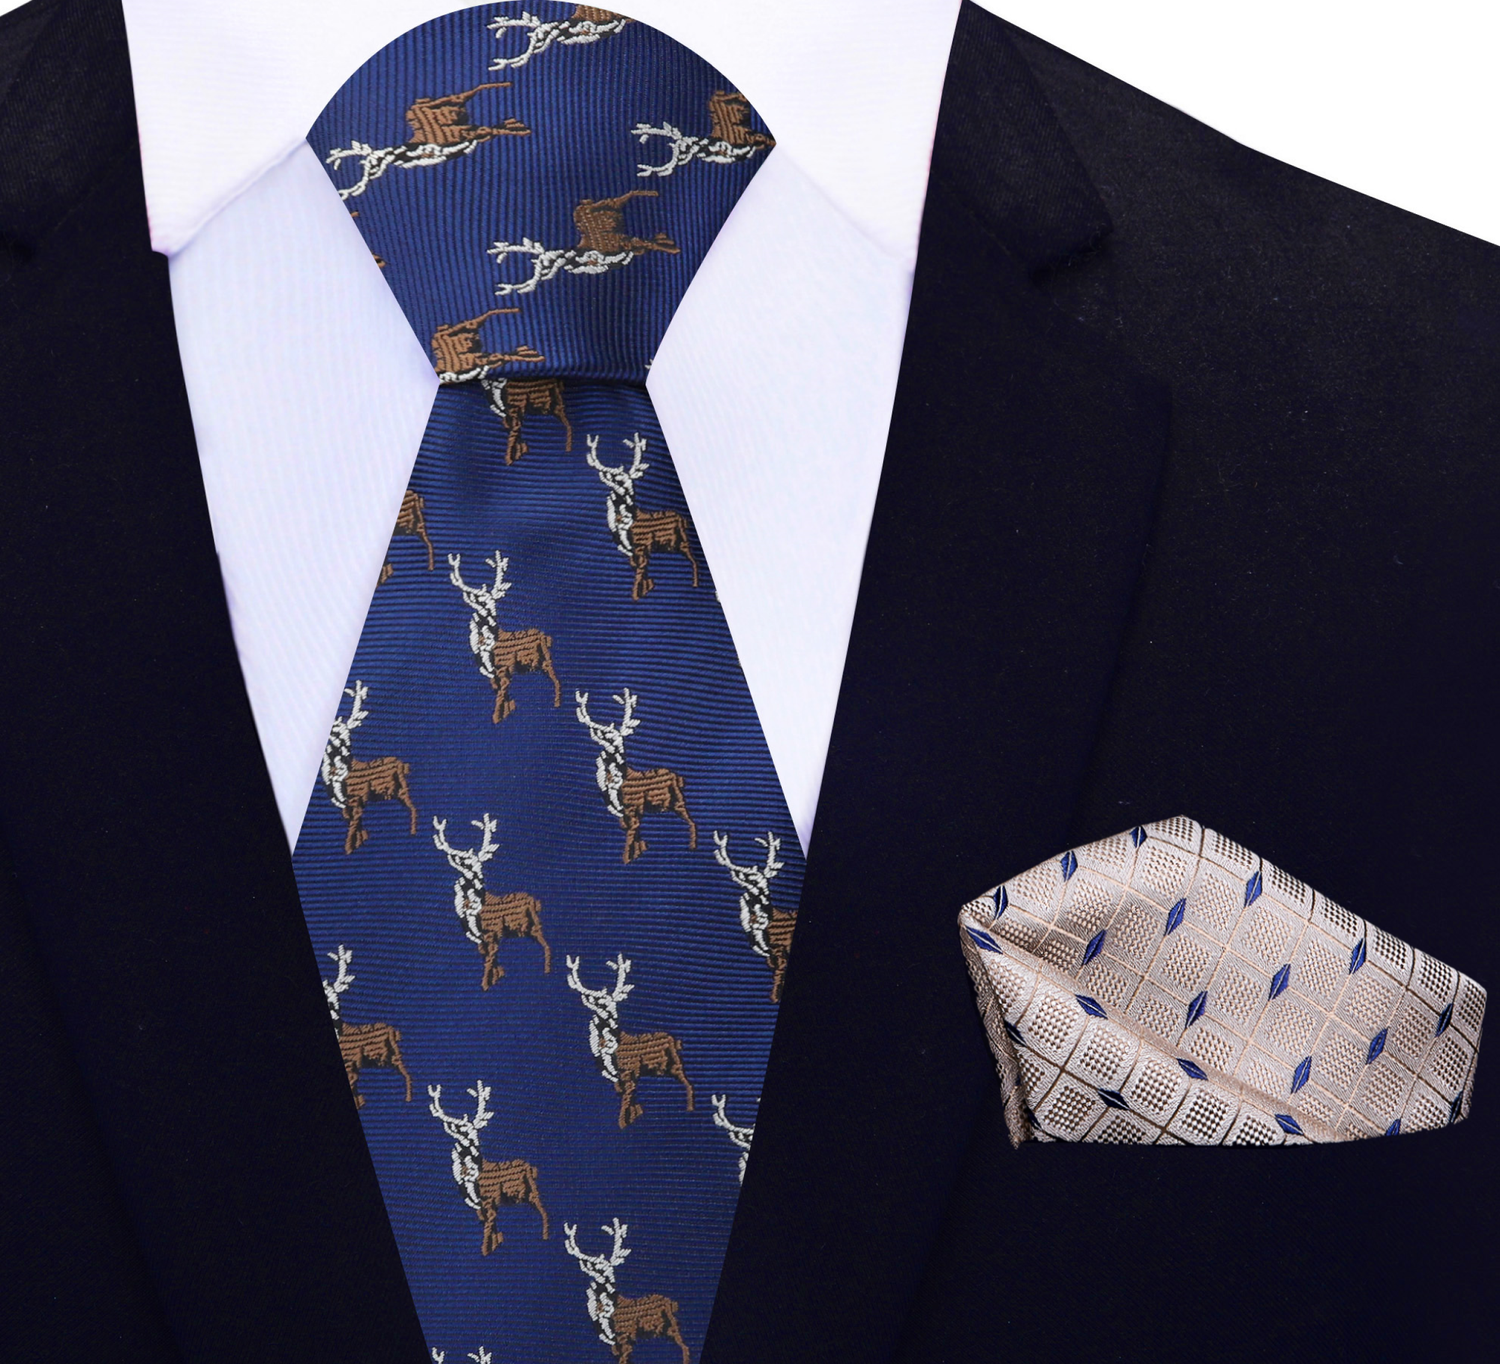 View 2: Blue, Brown Antlered Deer Tie and Light Brown, Blue Geometric Square